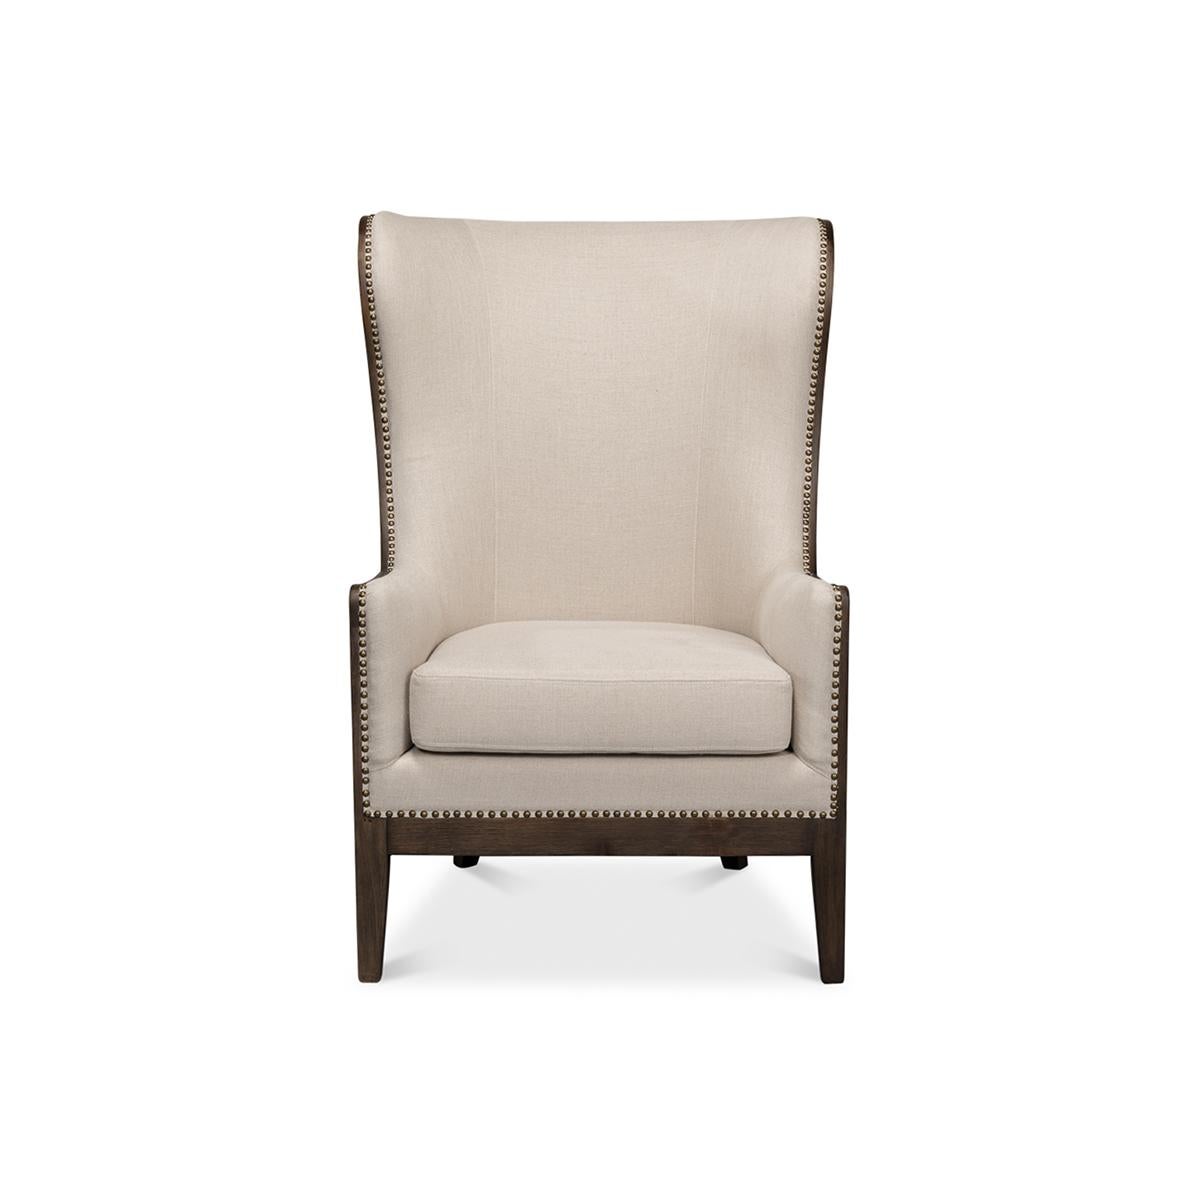 Updated Modern classic wingchair, covered in linen to make it neutral and easily placed in any environment. The real drama comes into focus when viewing the exposed ash construction elements on the exterior. Perfect comfort and incredible beauty on